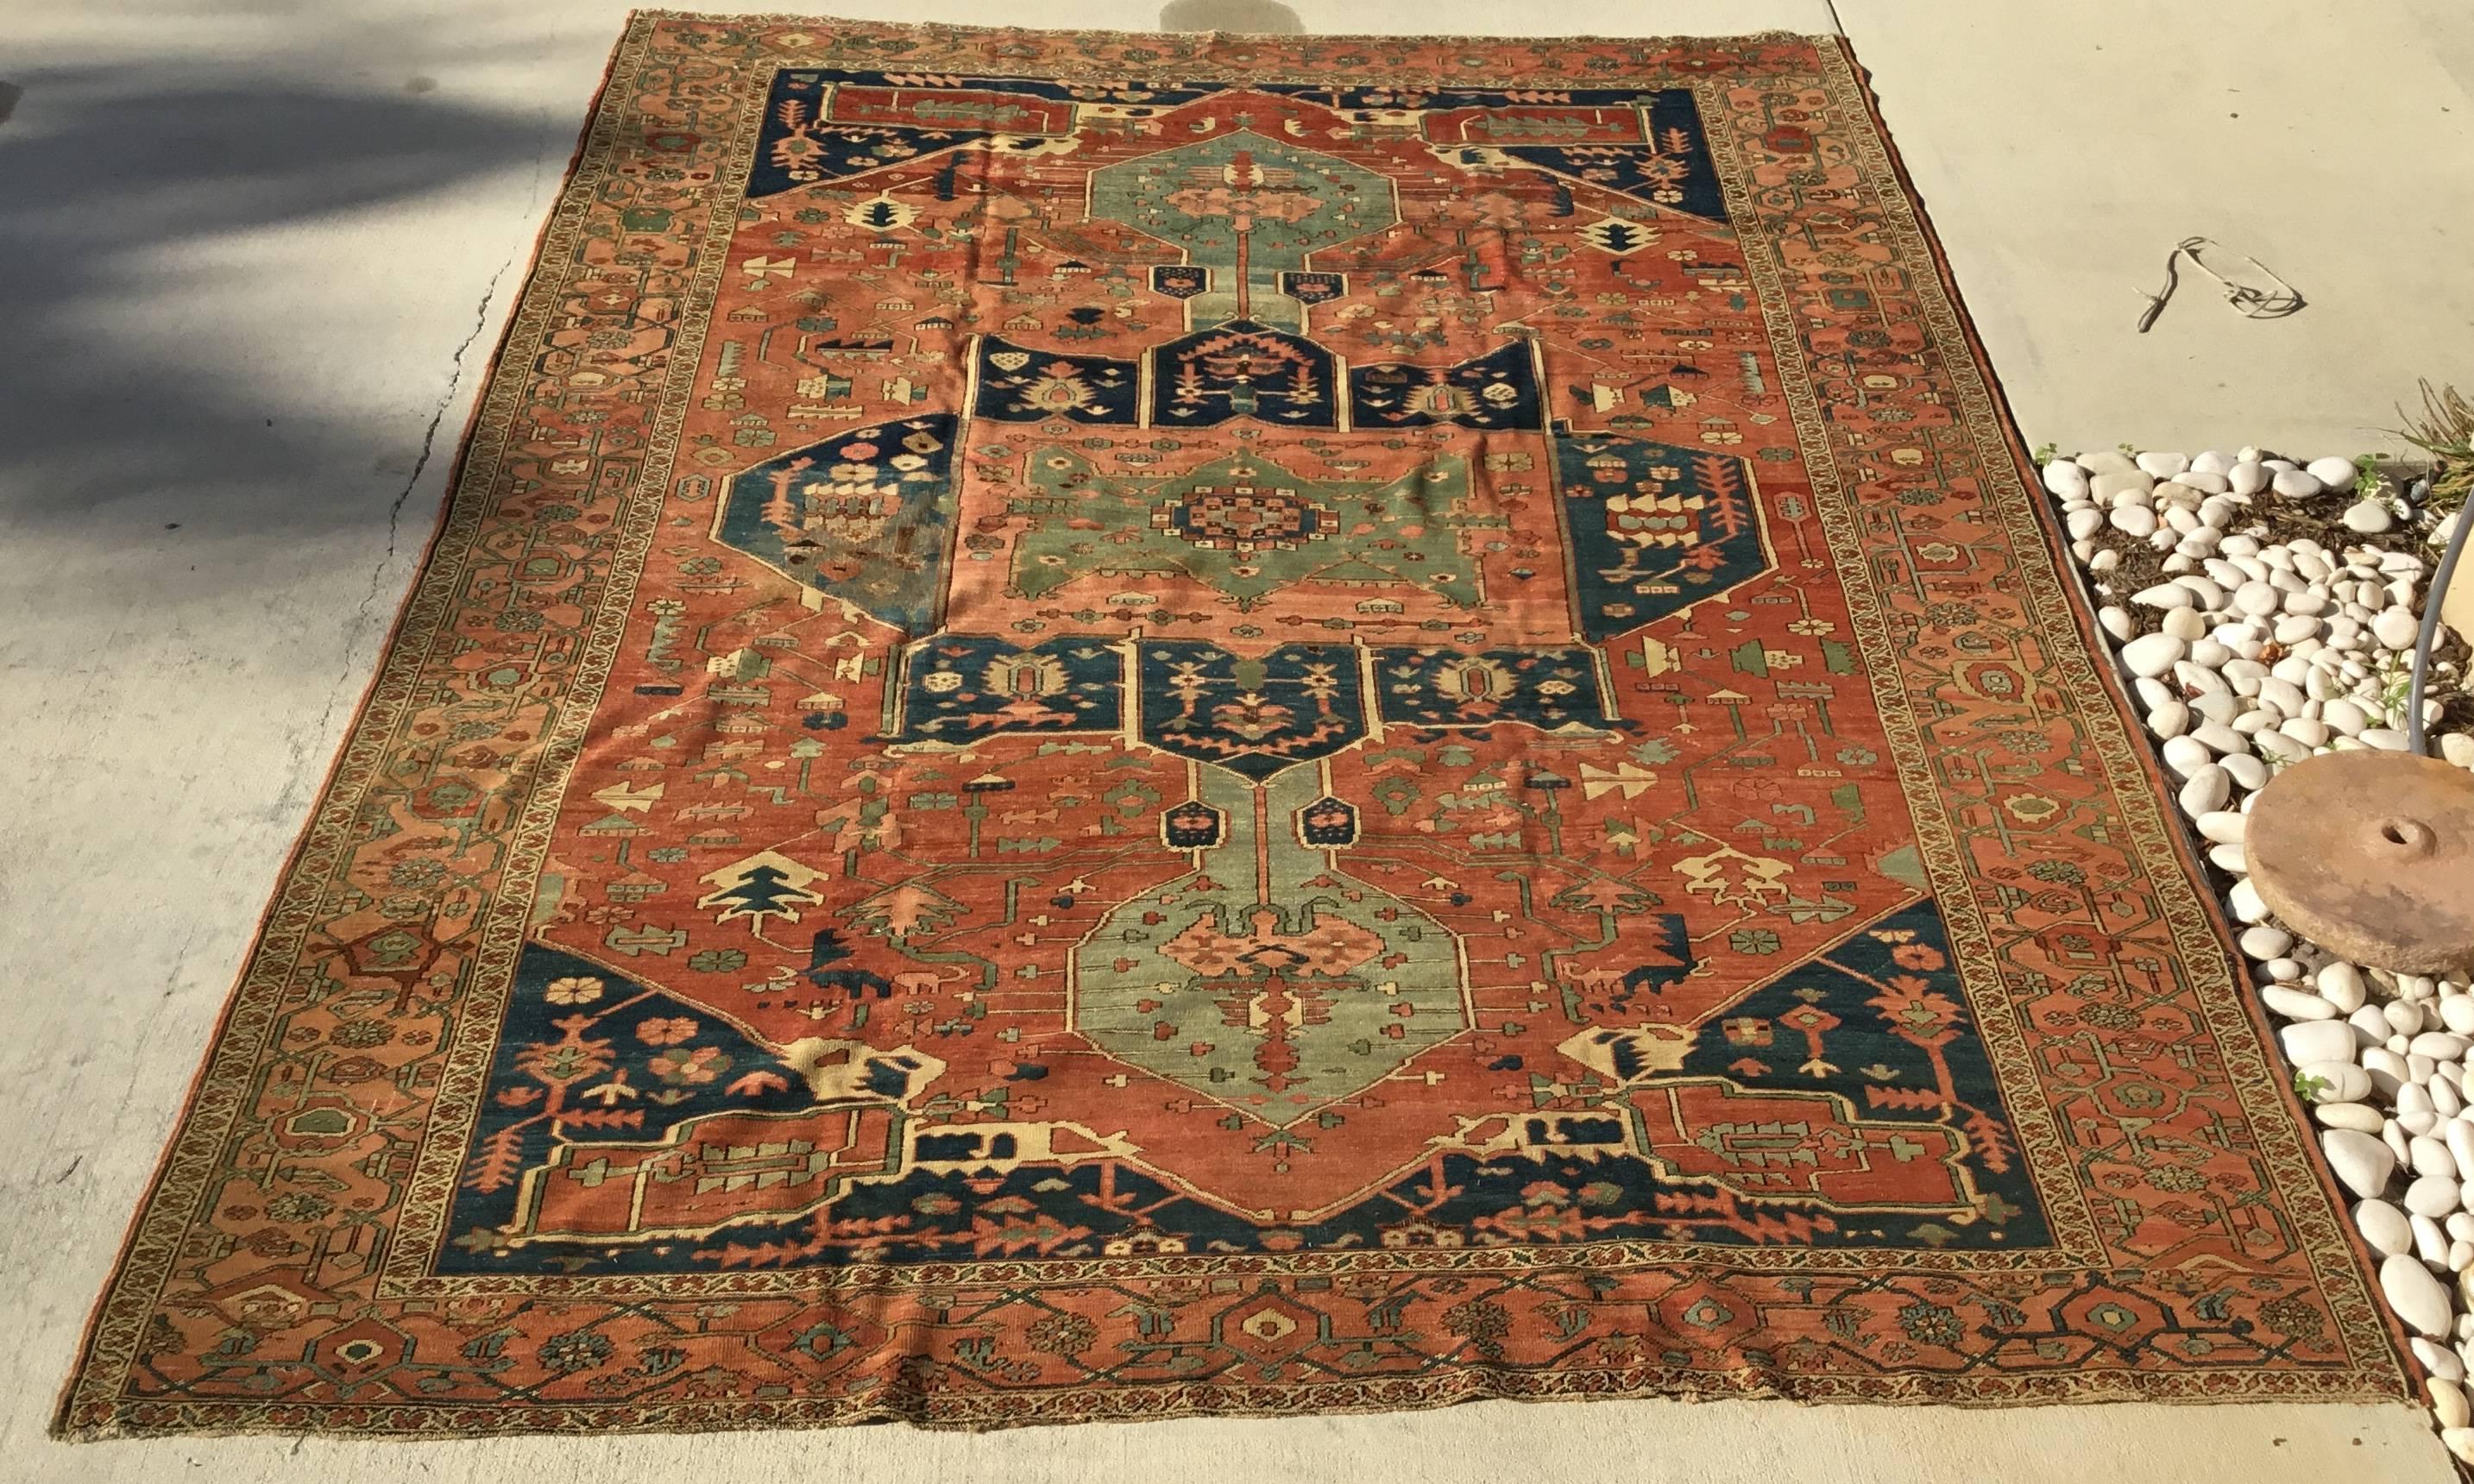 Beautiful antique Serapi rug, Serapi rugs are one of the most sought after rugs and major draw for decorators and designers, Serapi carpets were hand woven in small workshop with multiple weavers working several years to complete each rug, and to